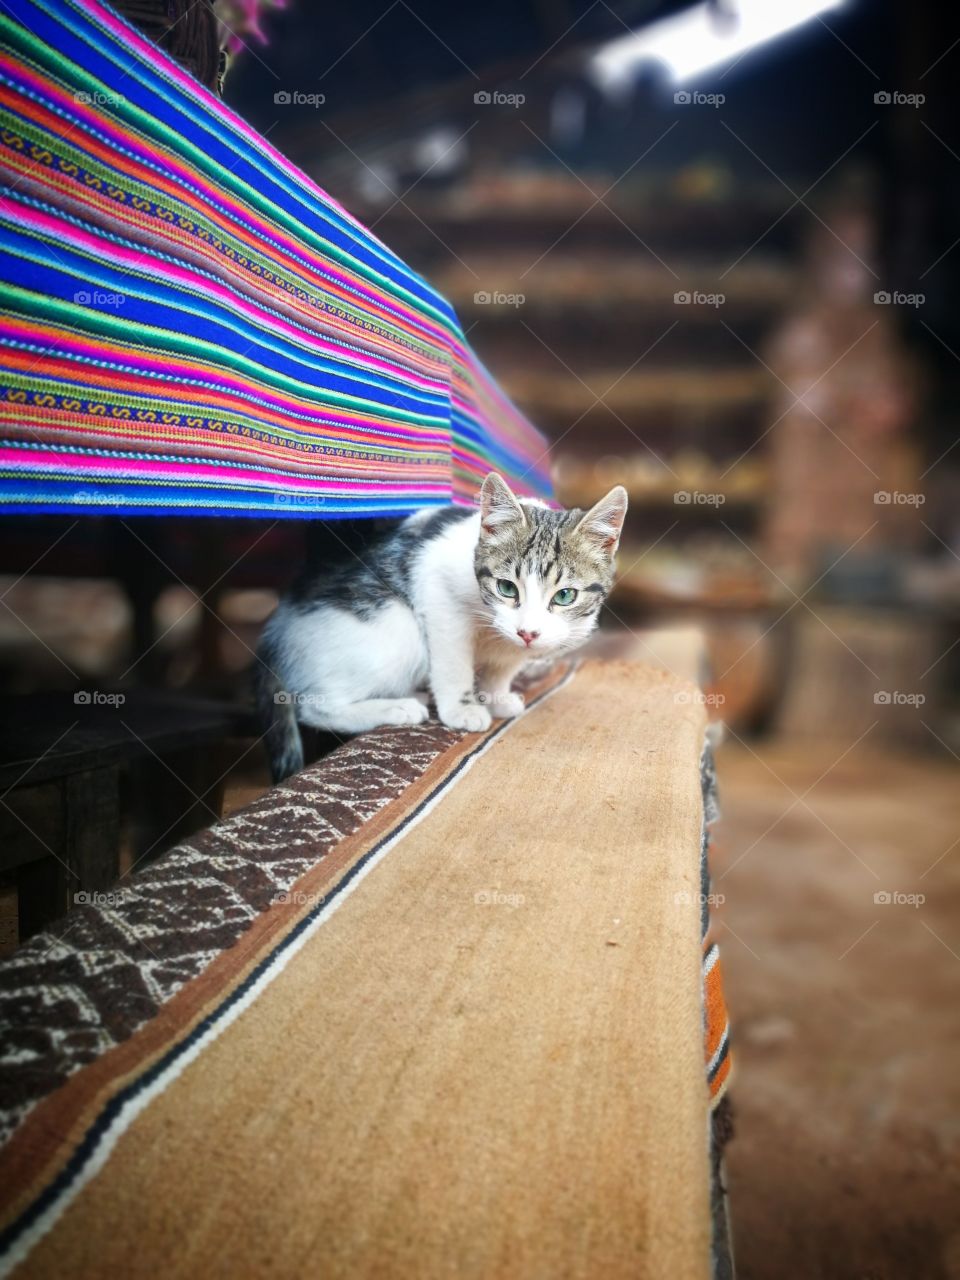 Cat sitting on a bench with soft focus